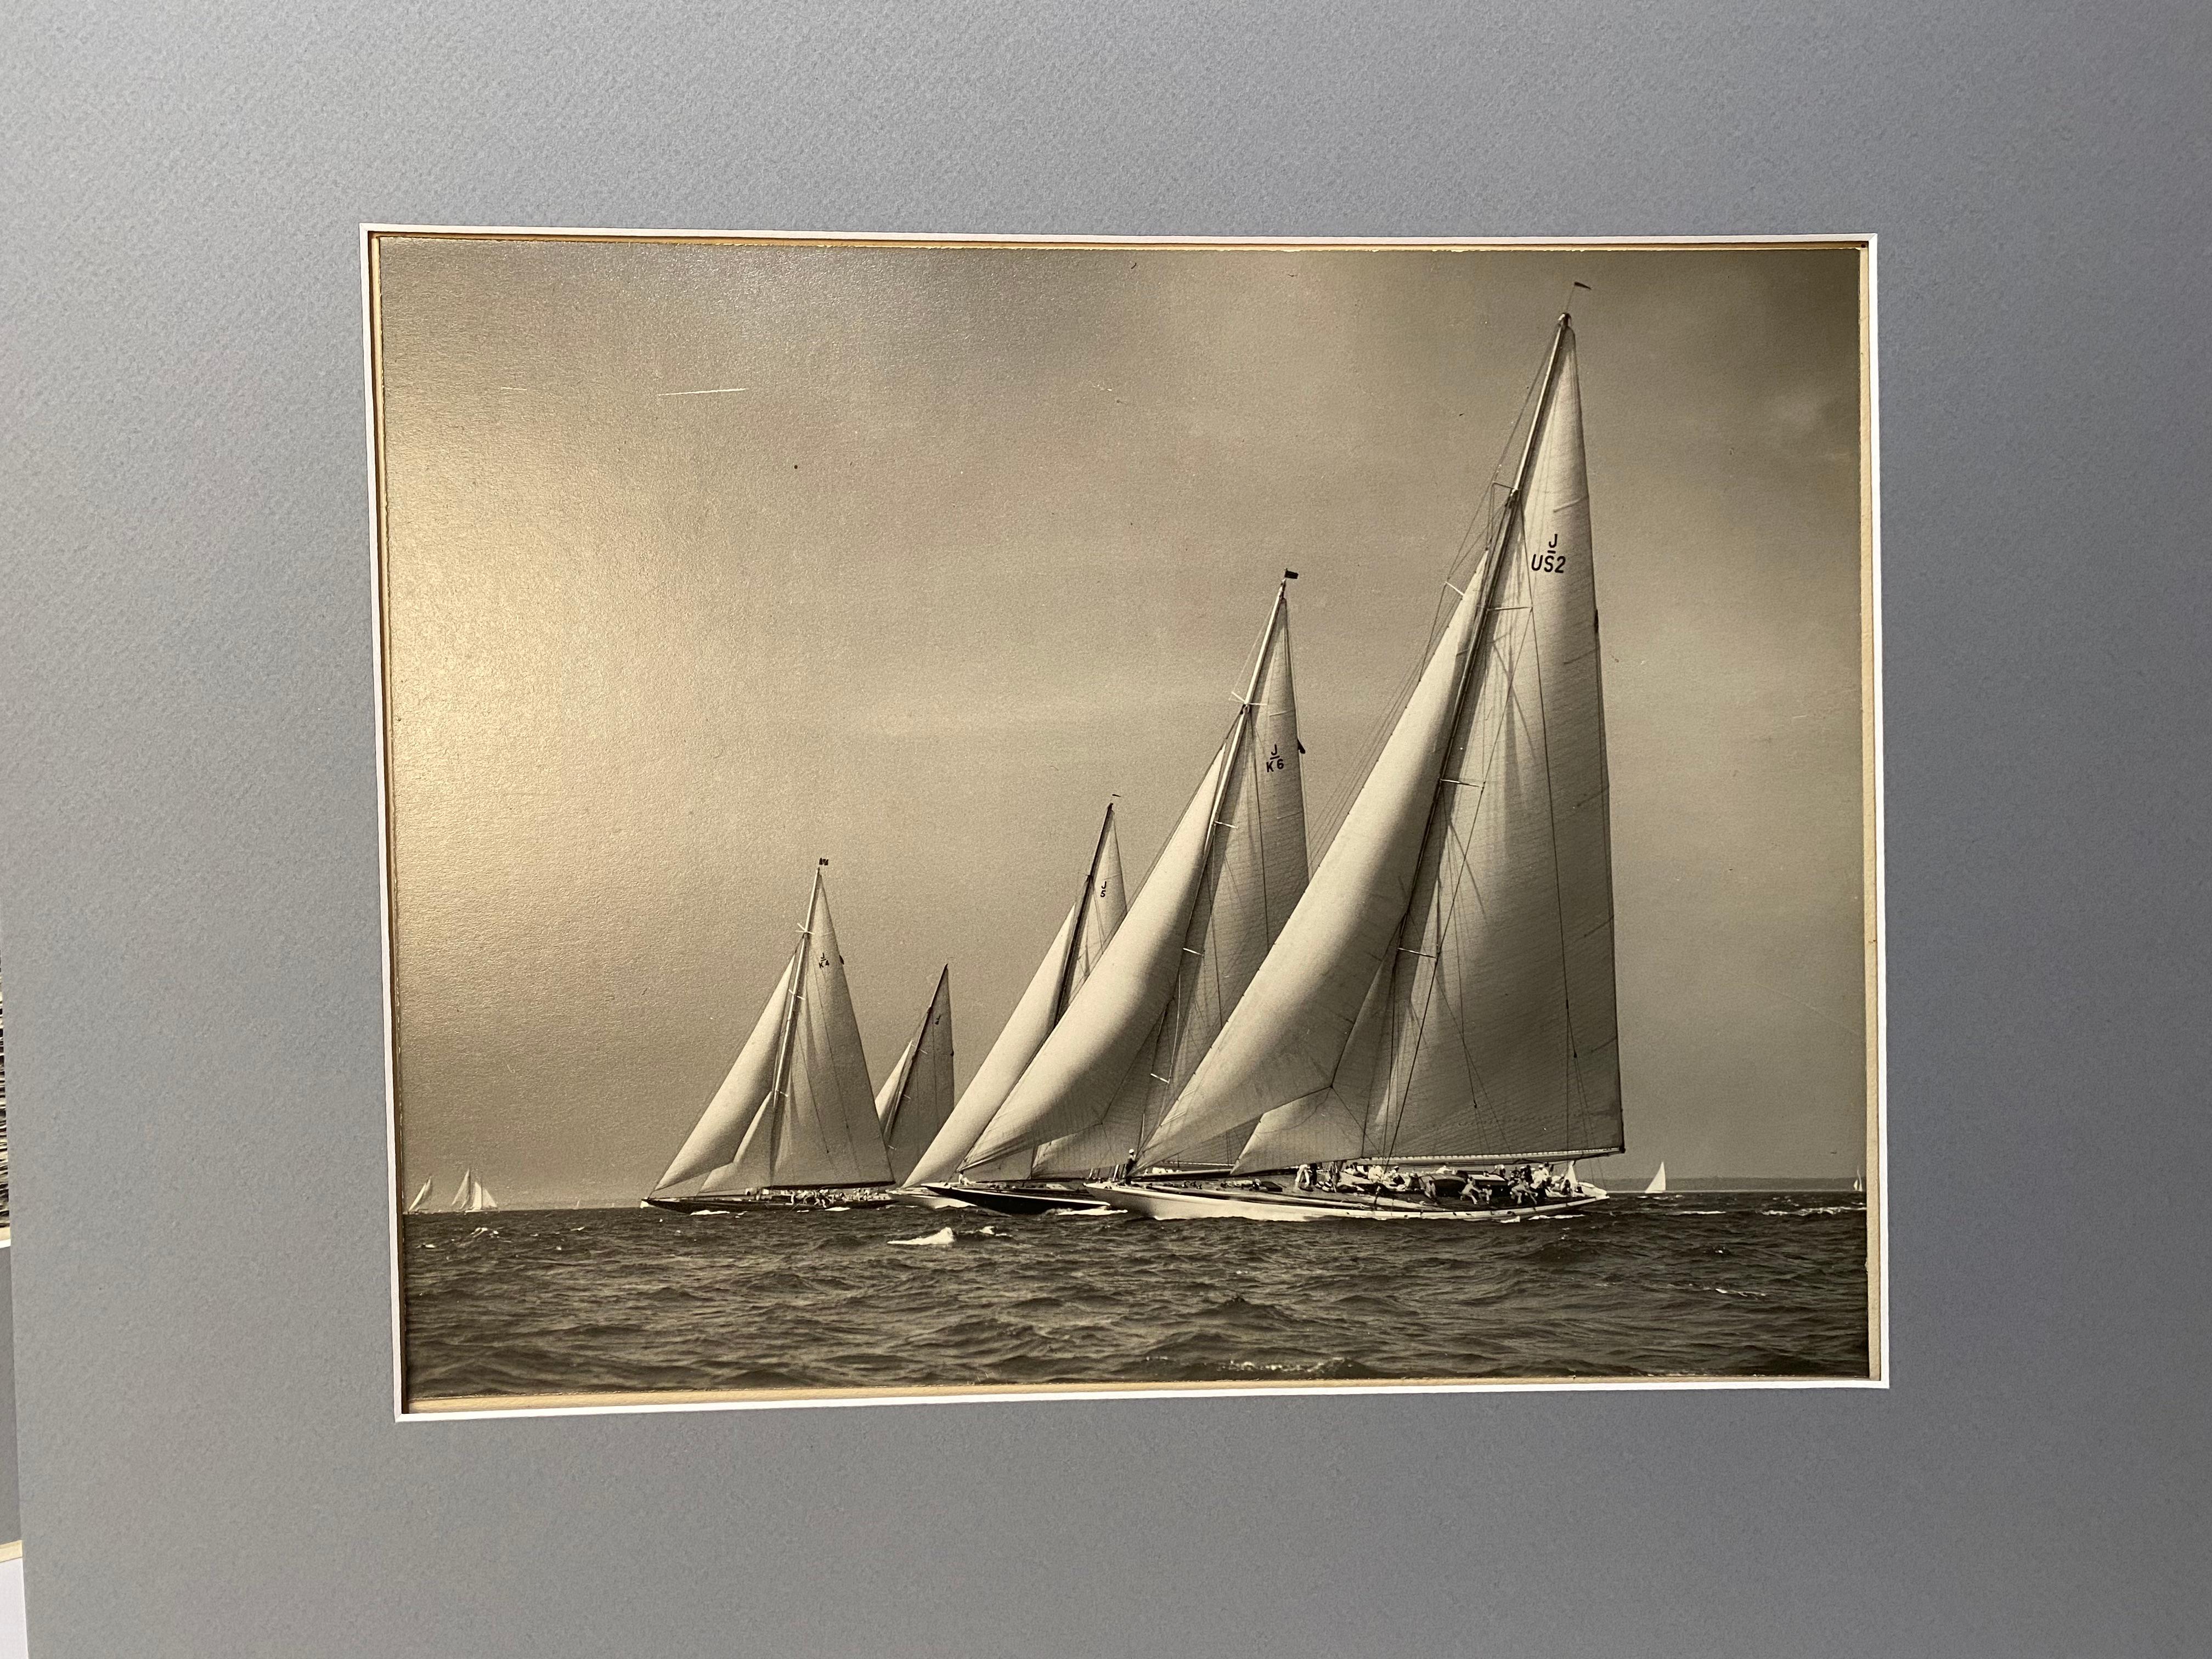 Three black and white sailboat photos from Morris Rosenfeld & Sons Photographic Illustrators. All three are signed and dated with all pertinent information regarding the size and weight of each yacht. Two are dated 1937 and The Spectre is dated